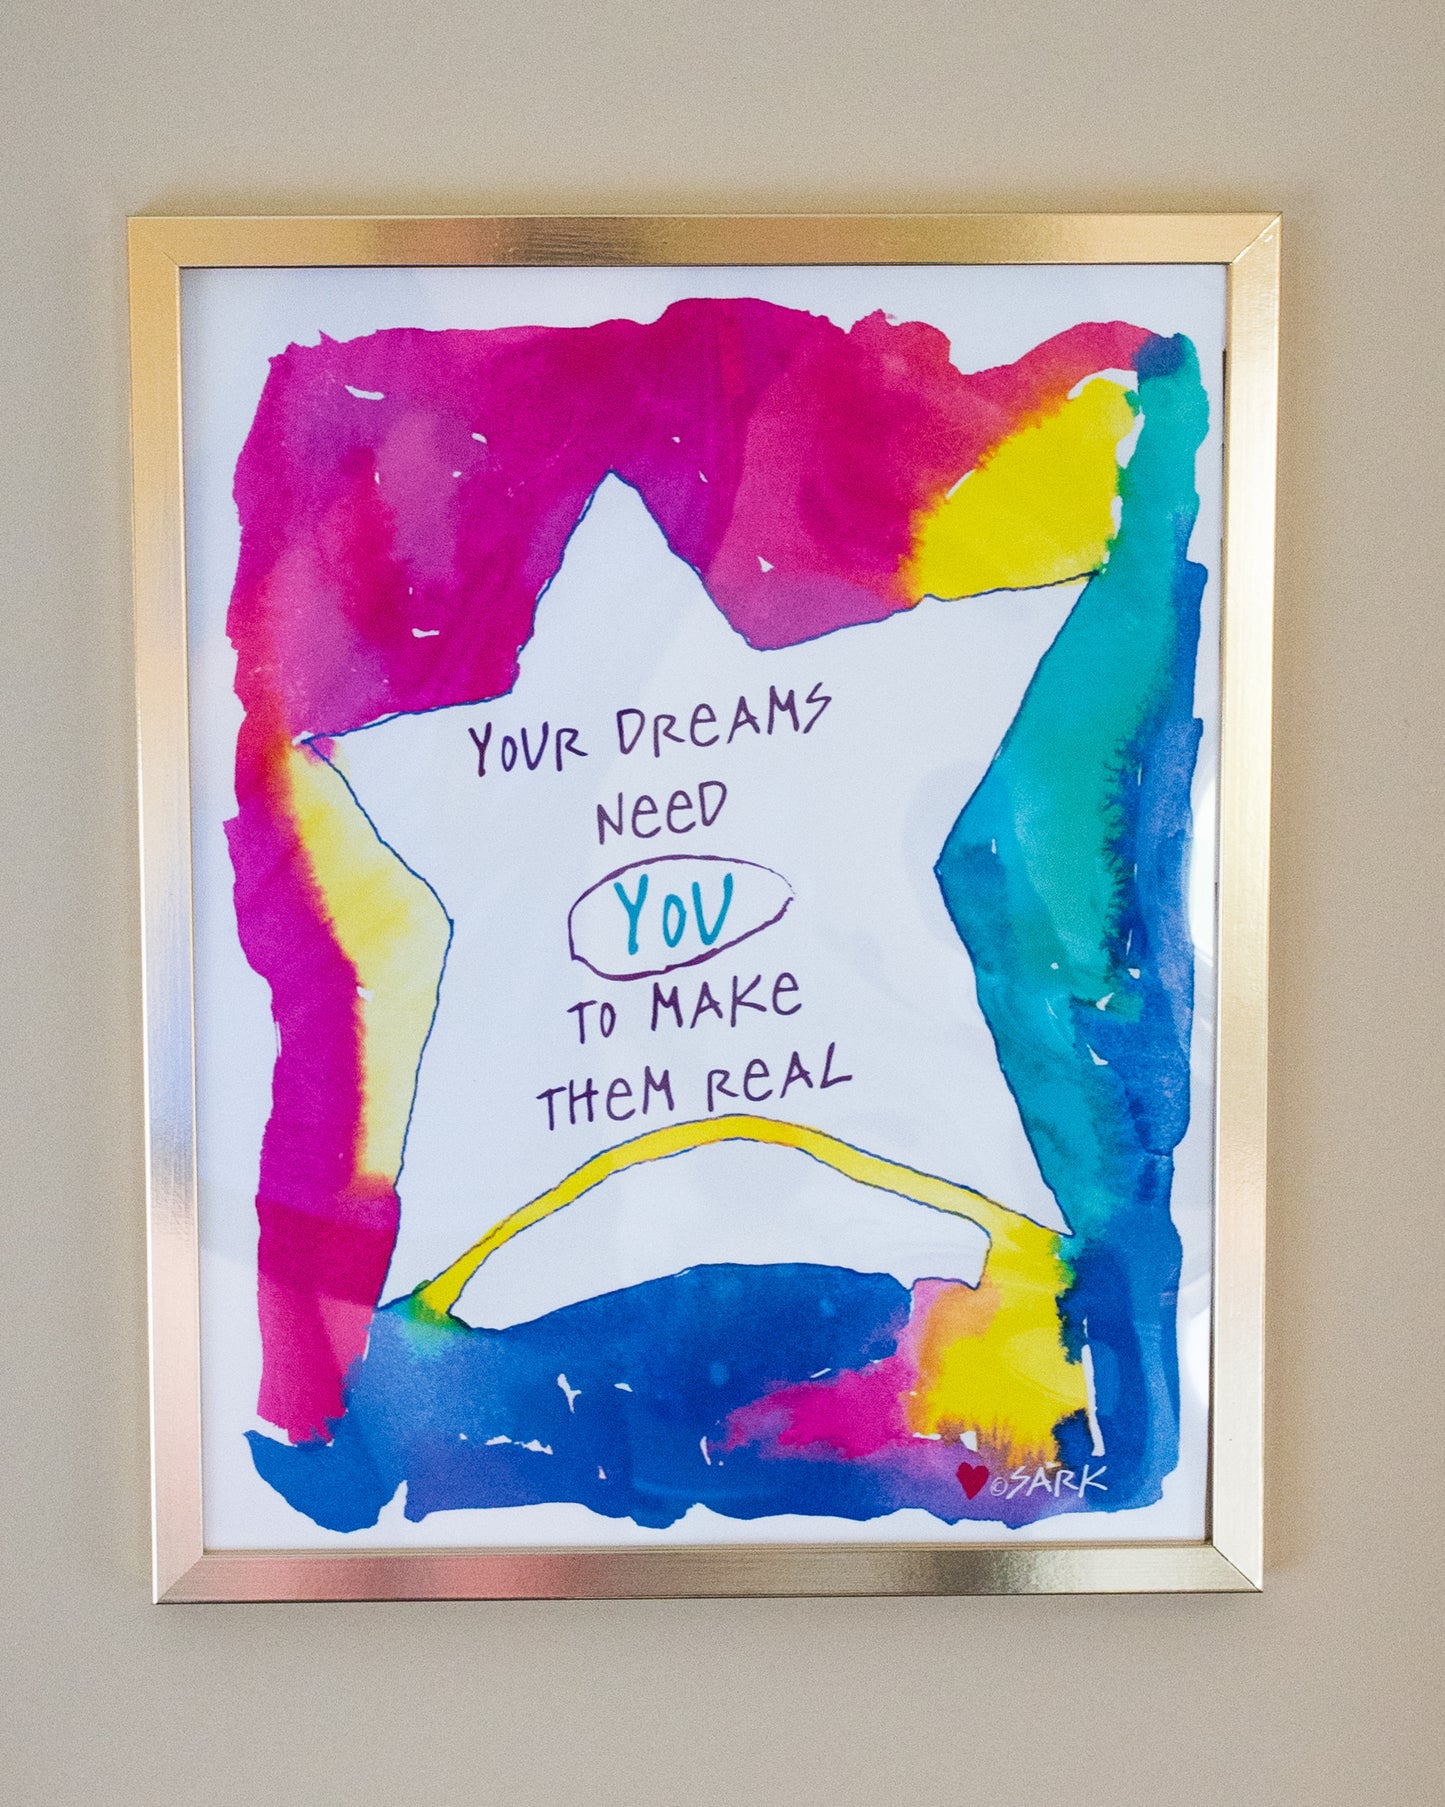 Your Dreams Need You To Make Them REAL by SARK - Premium Matte Art Print